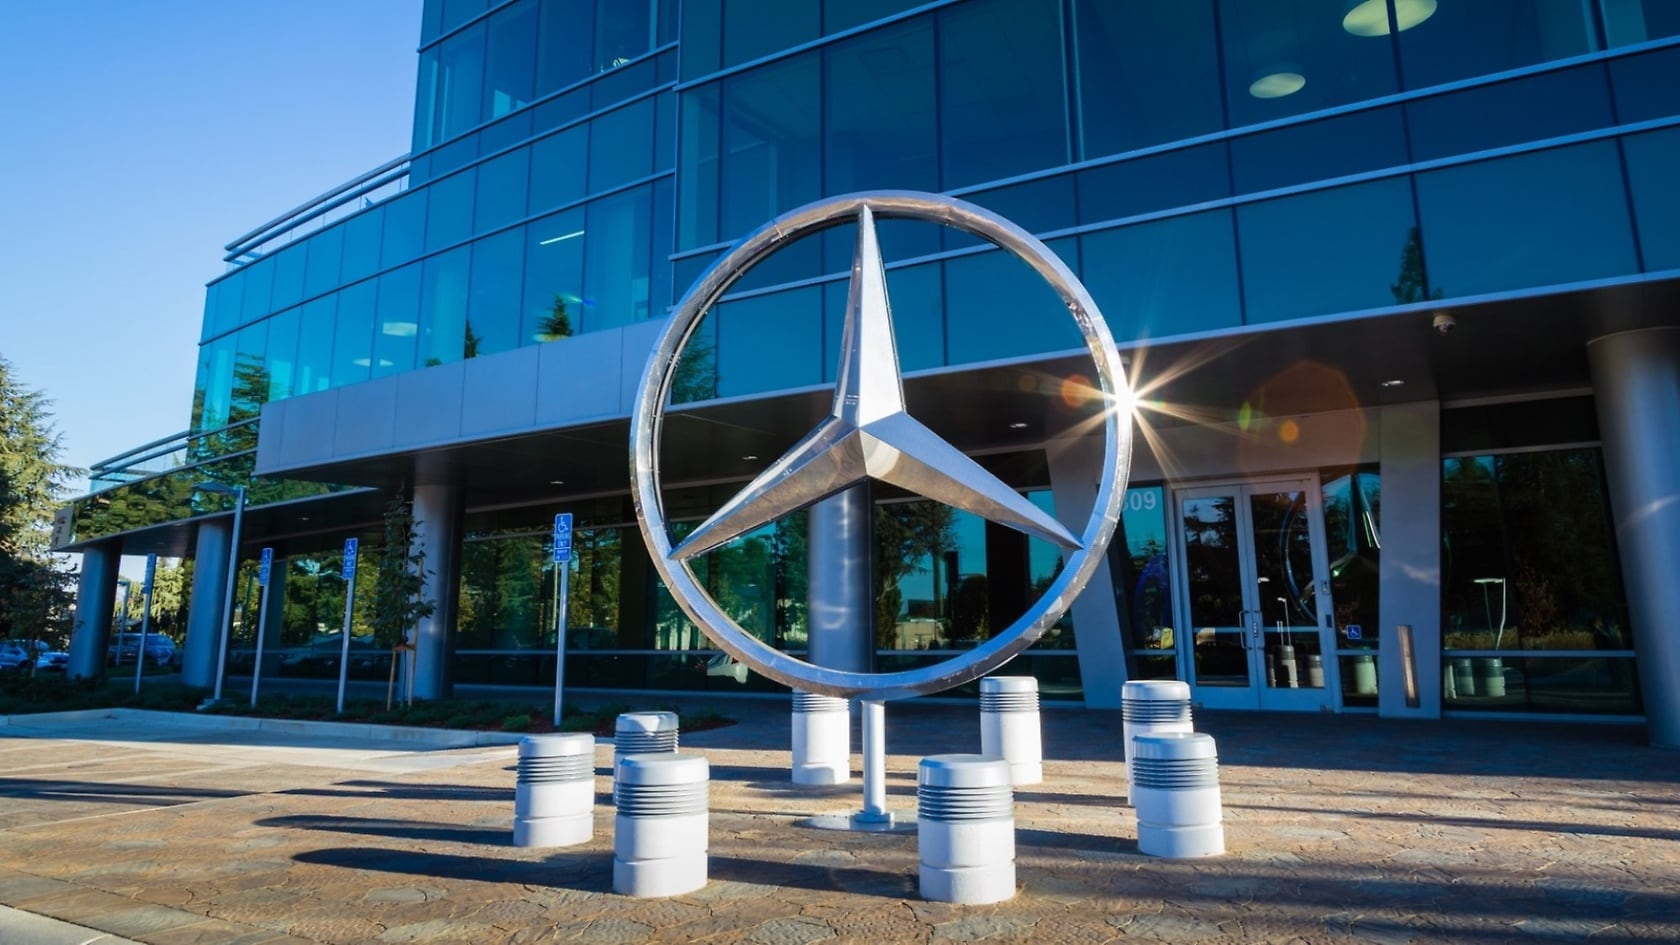 Mercedes-Benz Research and Developement North America.